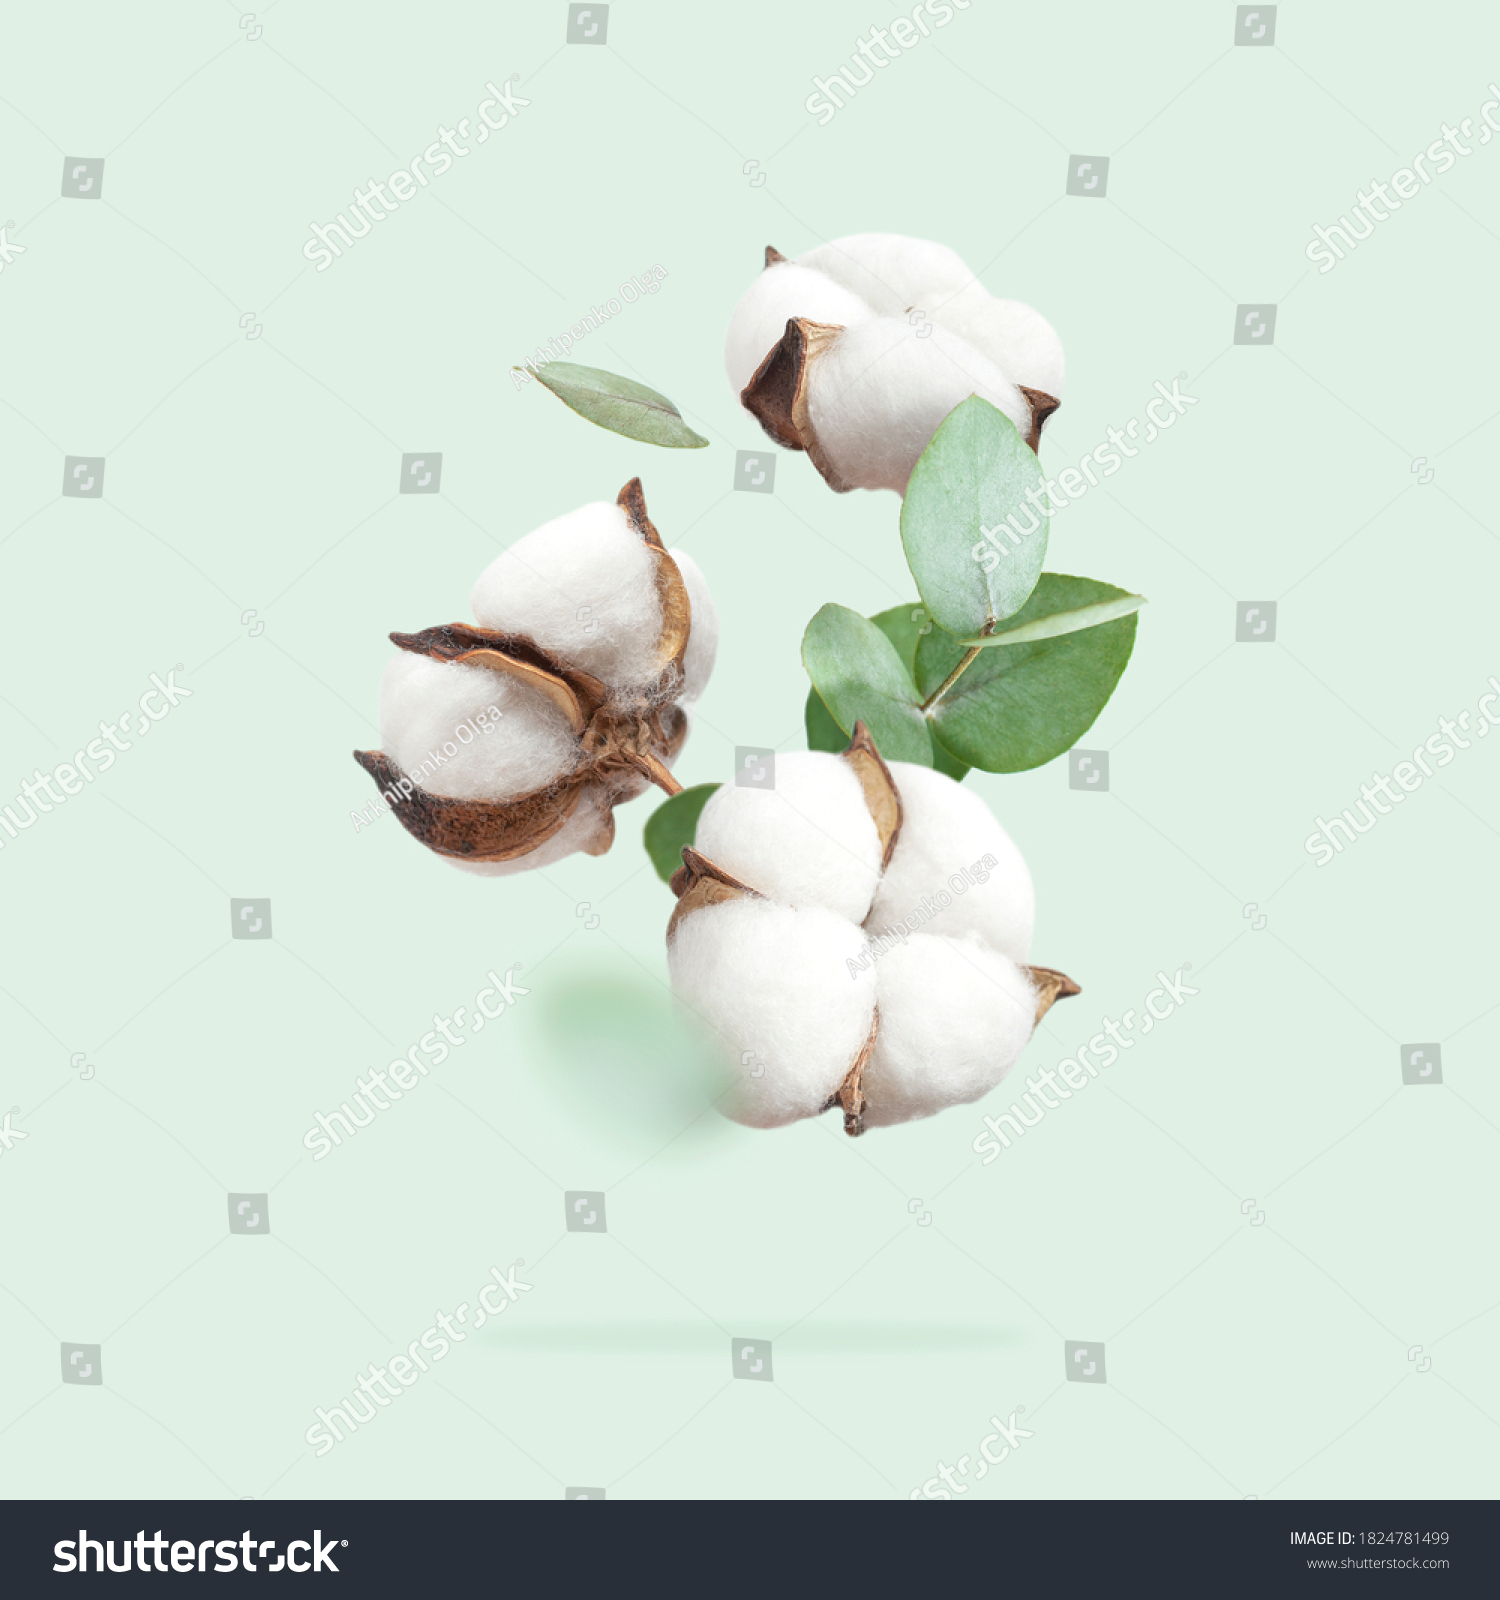 Flying cotton flowers, green twigs of eucalyptus on mint green background. Creative Floral background with cotton, delicate flowers of fluffy cotton. Flat lay flowers composition, greeting card #1824781499